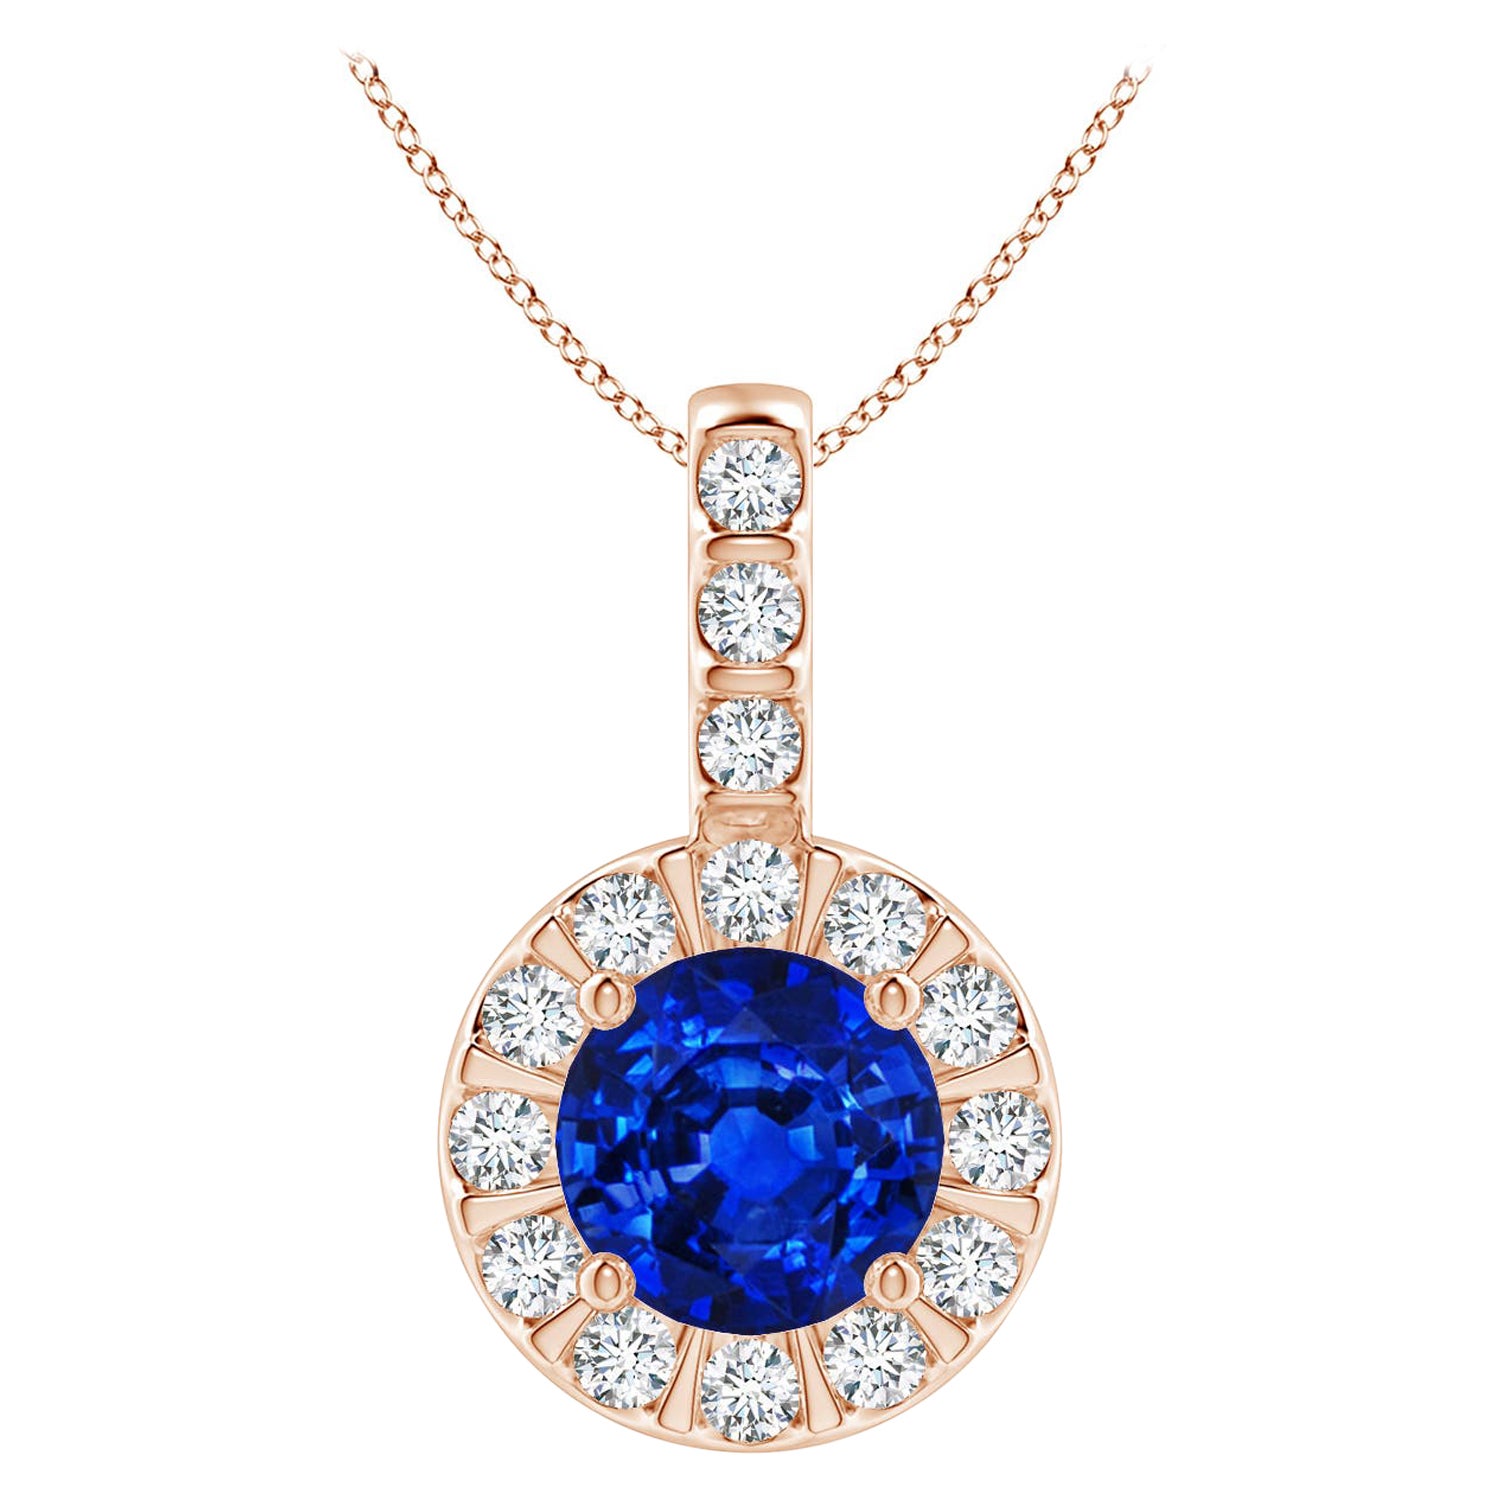 ANGARA Natural 1ct Blue Sapphire Pendant with Diamond Halo in 14K Rose Gold